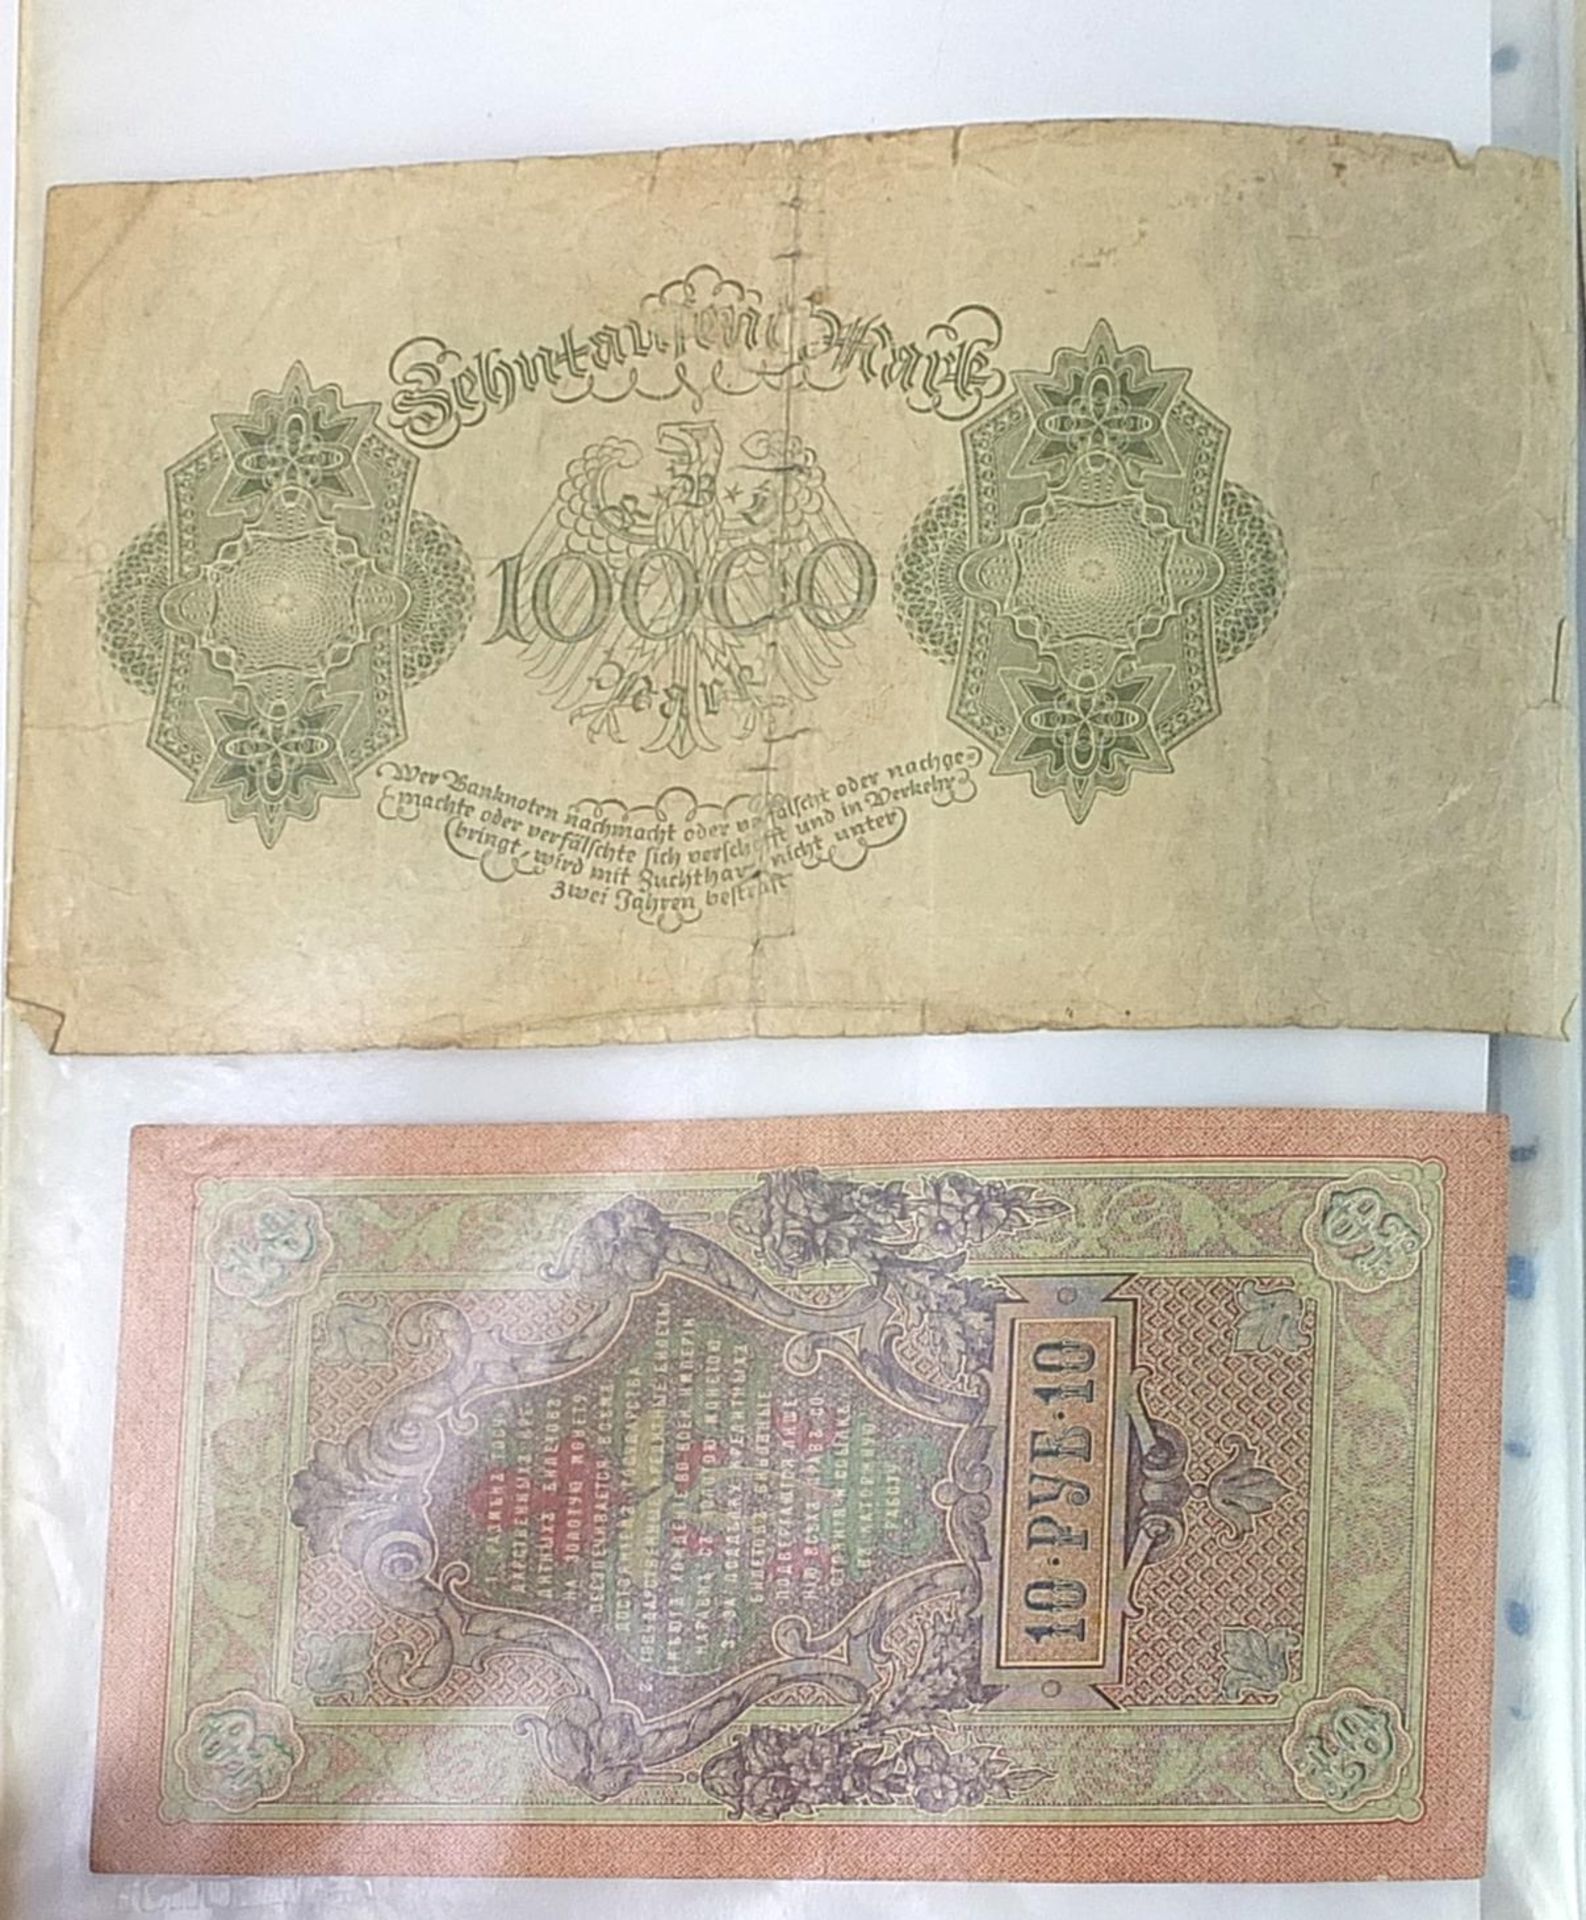 World banknotes including German and Russian examples - Image 4 of 16